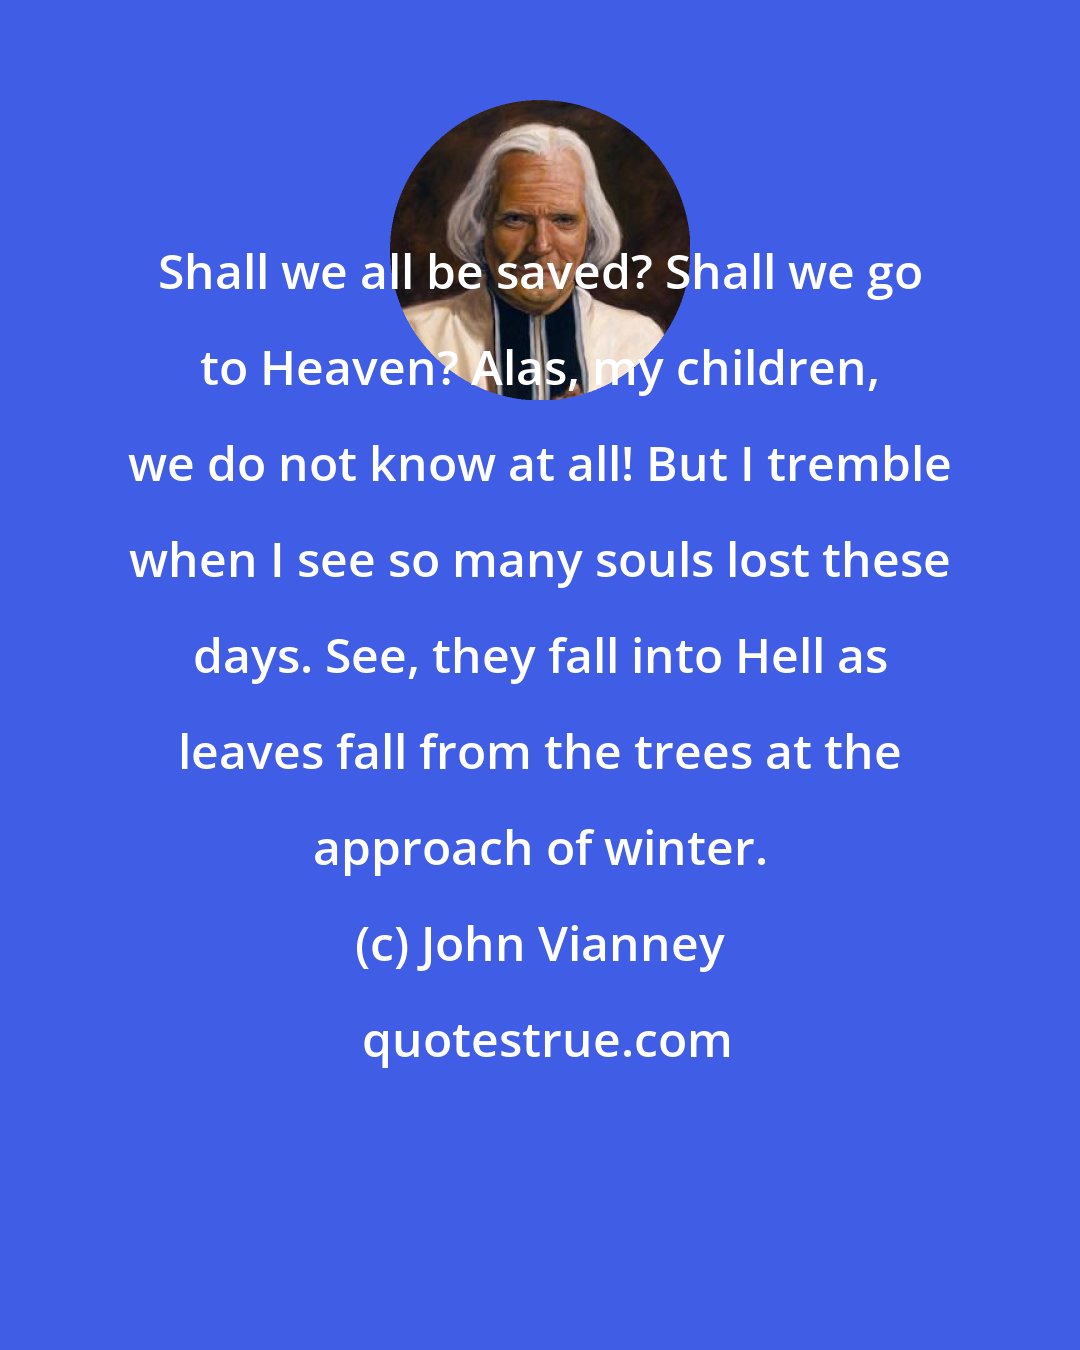 John Vianney: Shall we all be saved? Shall we go to Heaven? Alas, my children, we do not know at all! But I tremble when I see so many souls lost these days. See, they fall into Hell as leaves fall from the trees at the approach of winter.